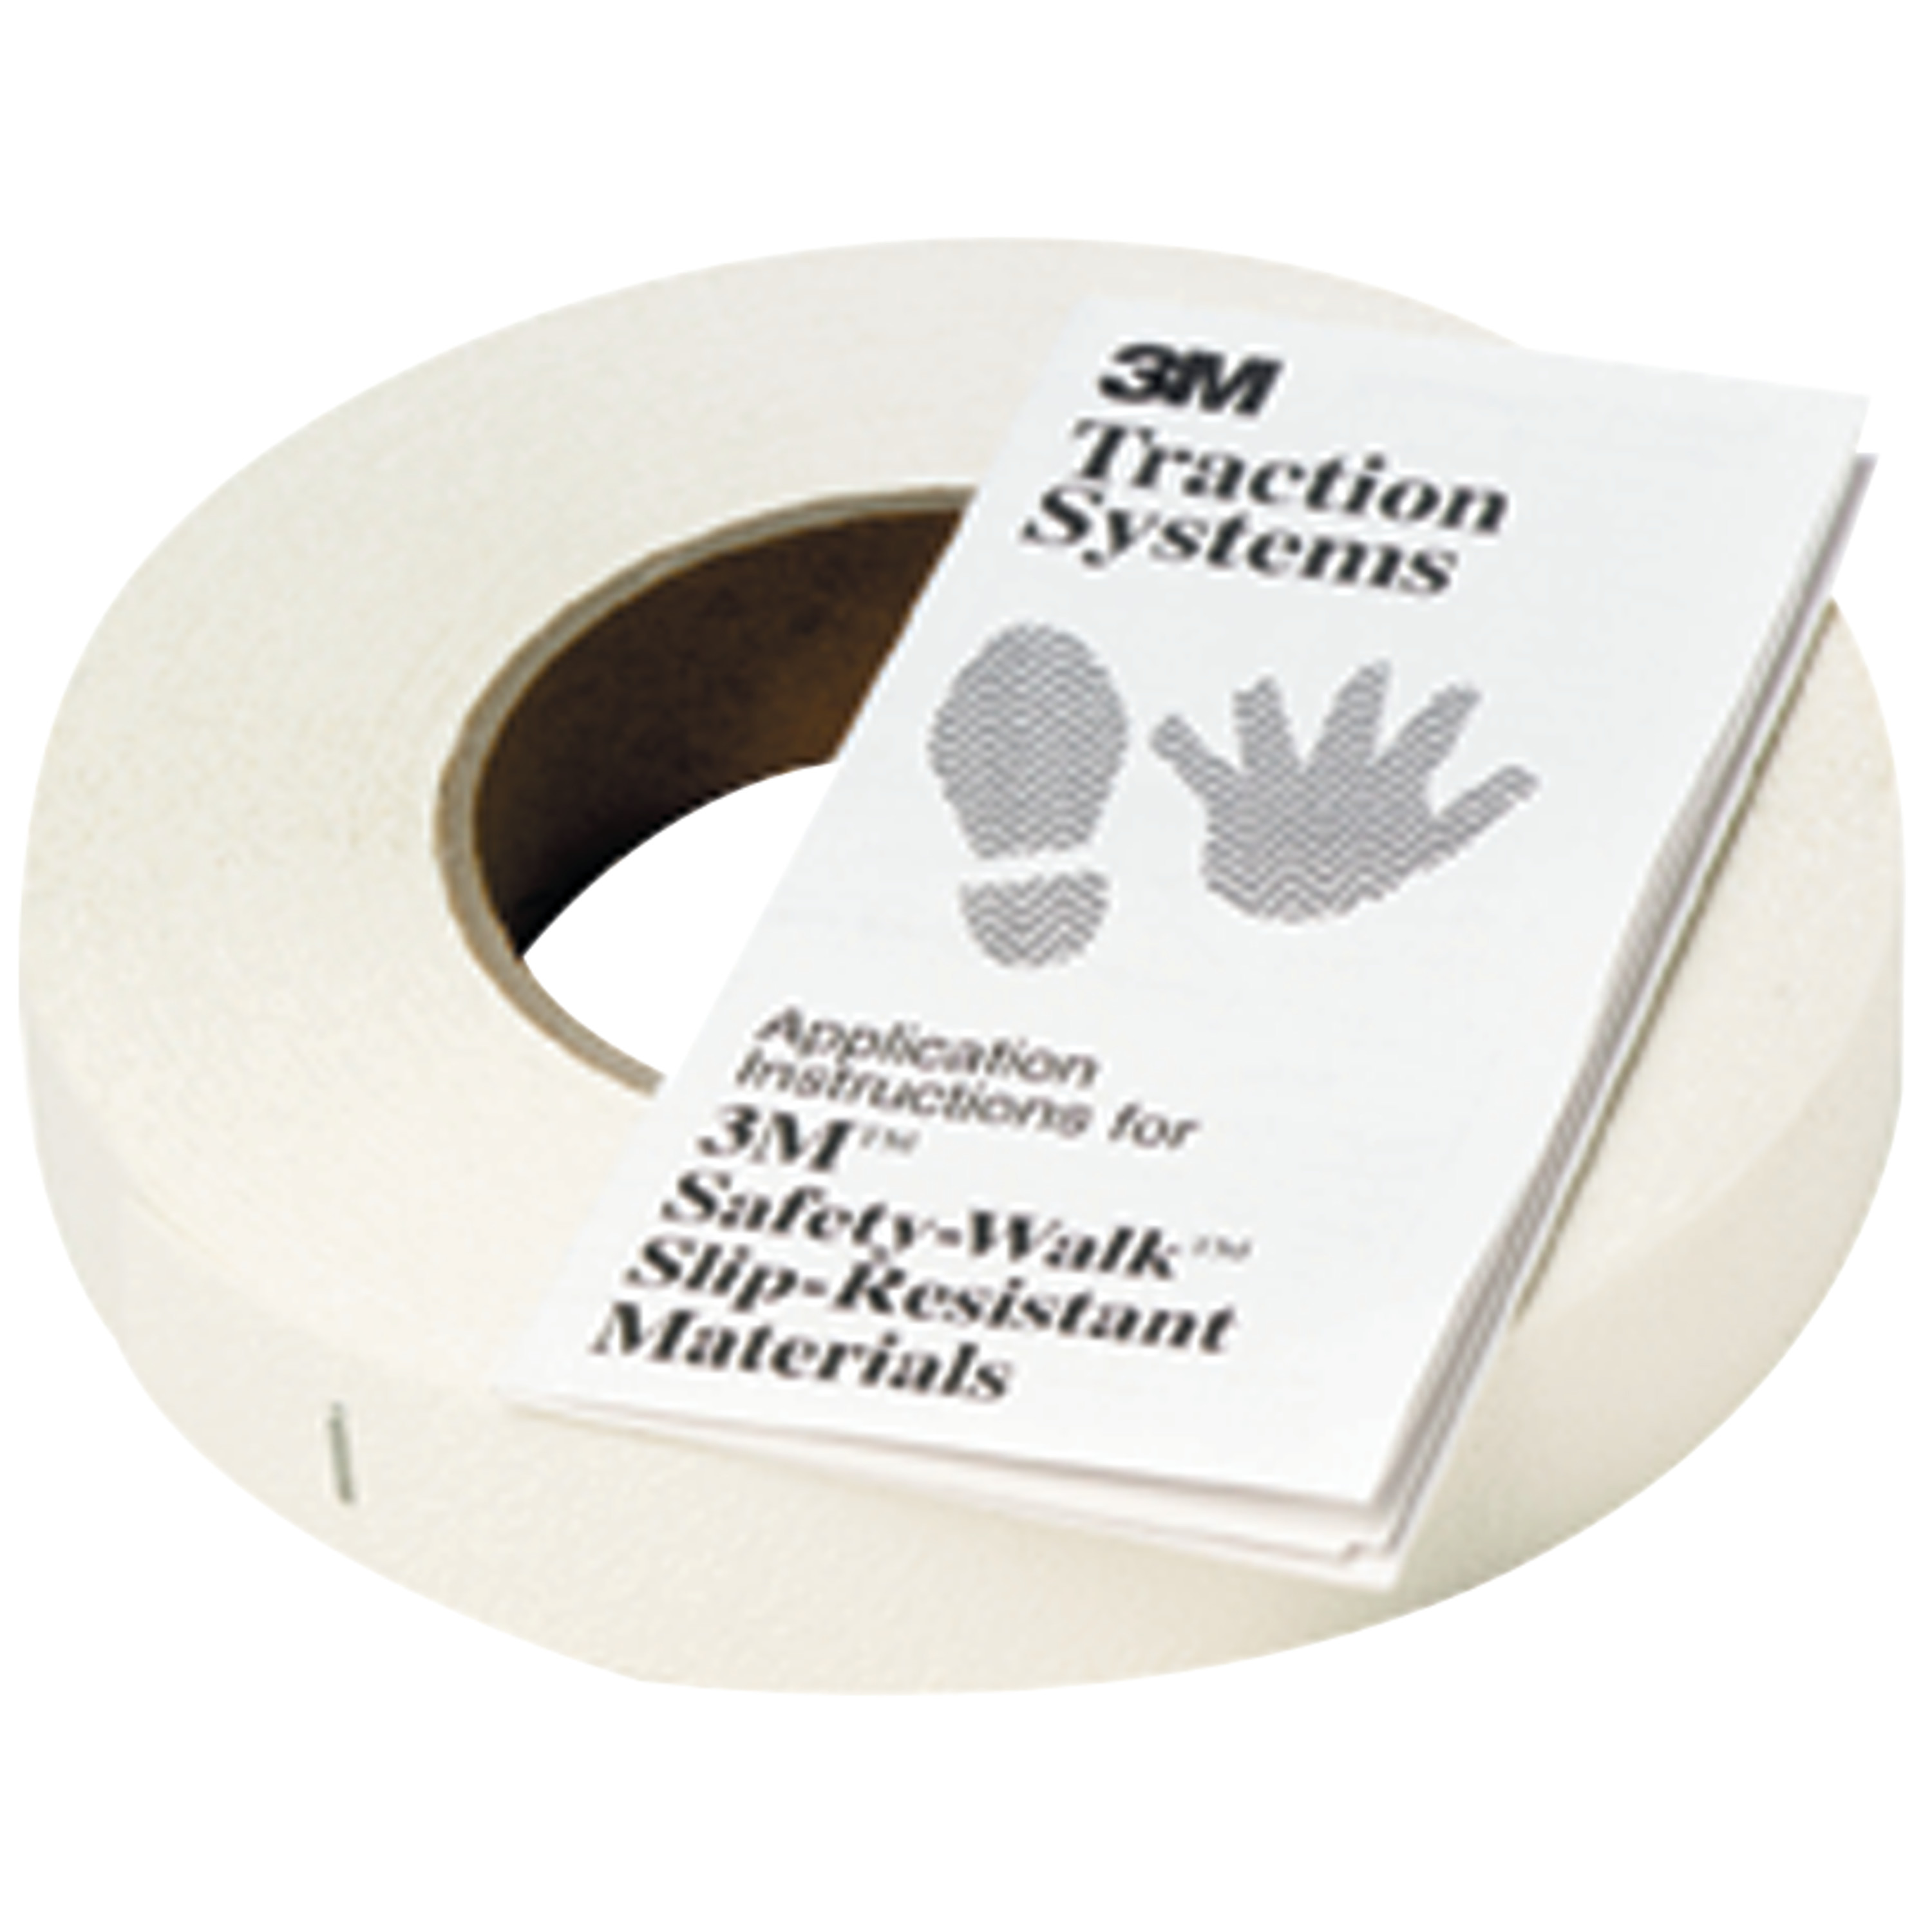 3M™ Safety-Walk™ Slip-Resistant Fine Resilient Tapes & Treads 280,
White, 12 in x 60 ft, 1 Roll/Case